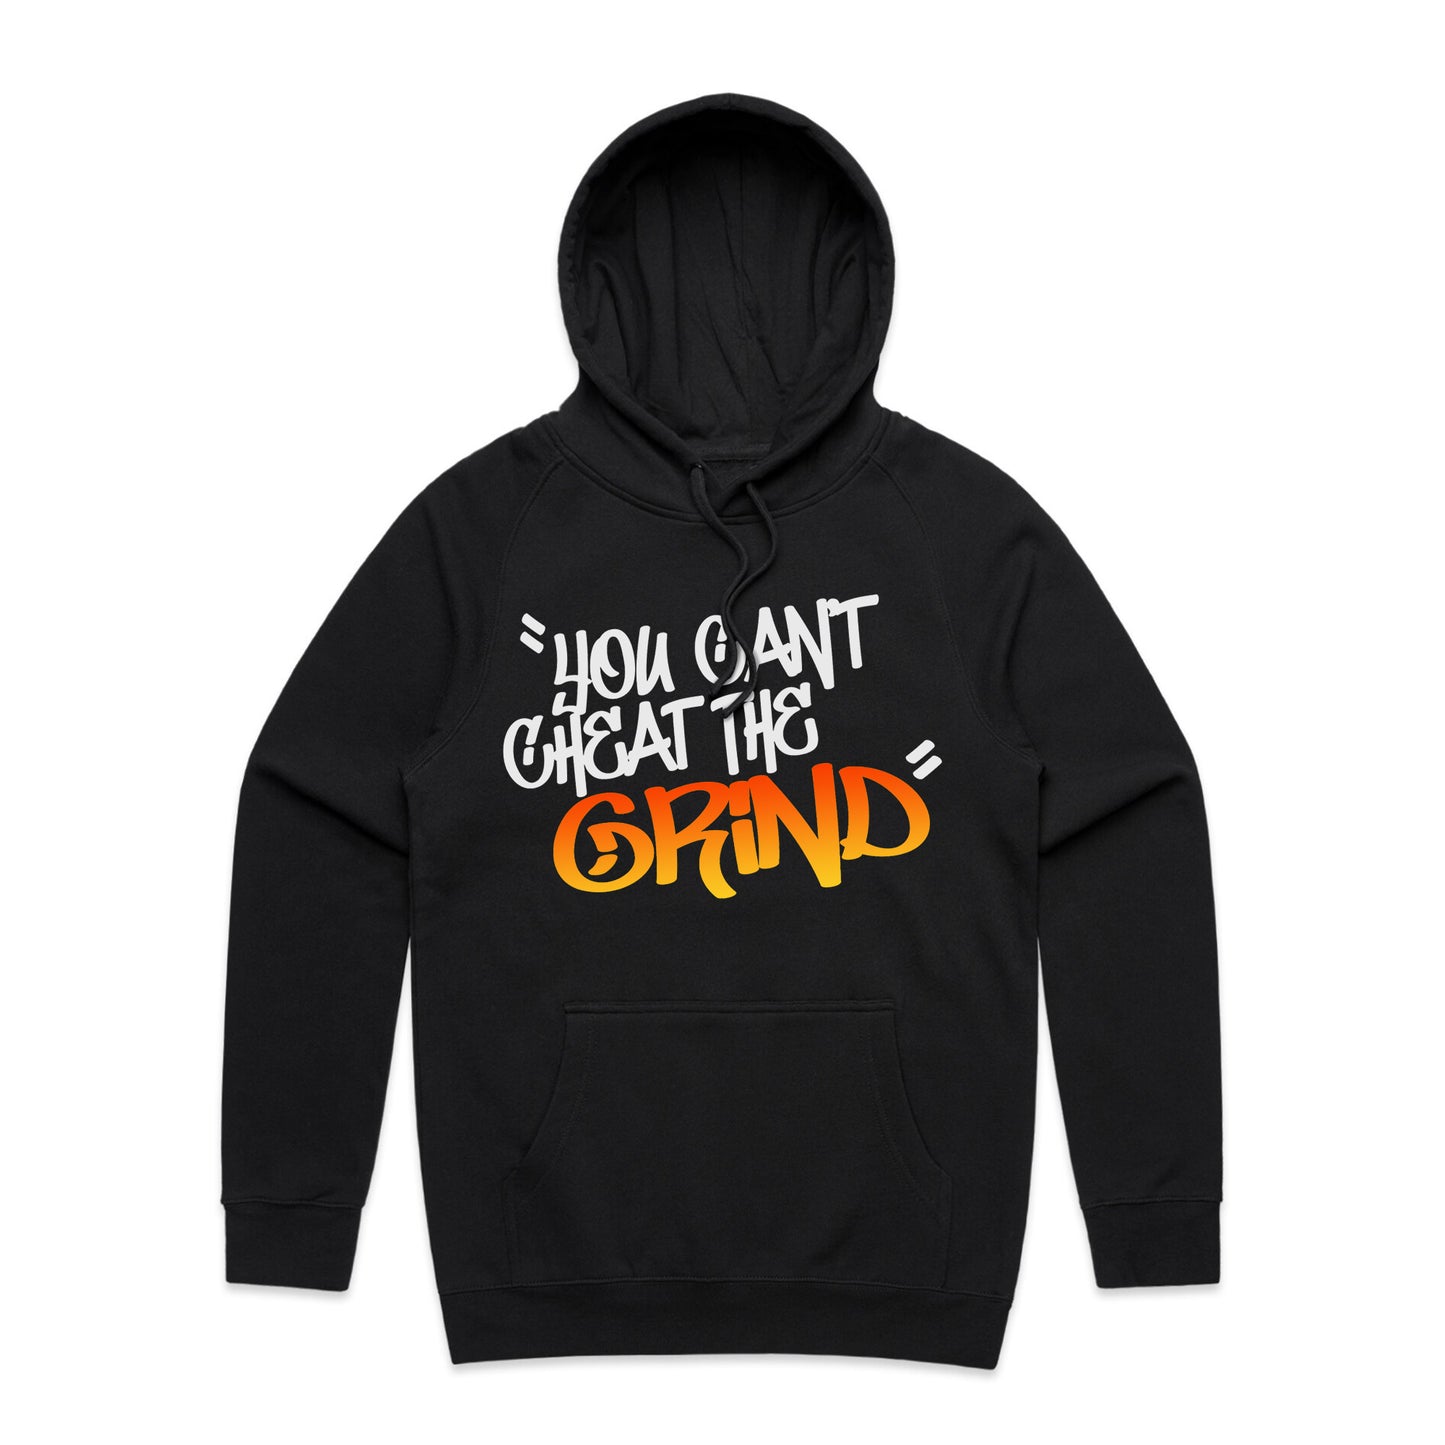 Can't Cheat The Grind Hoodie Black